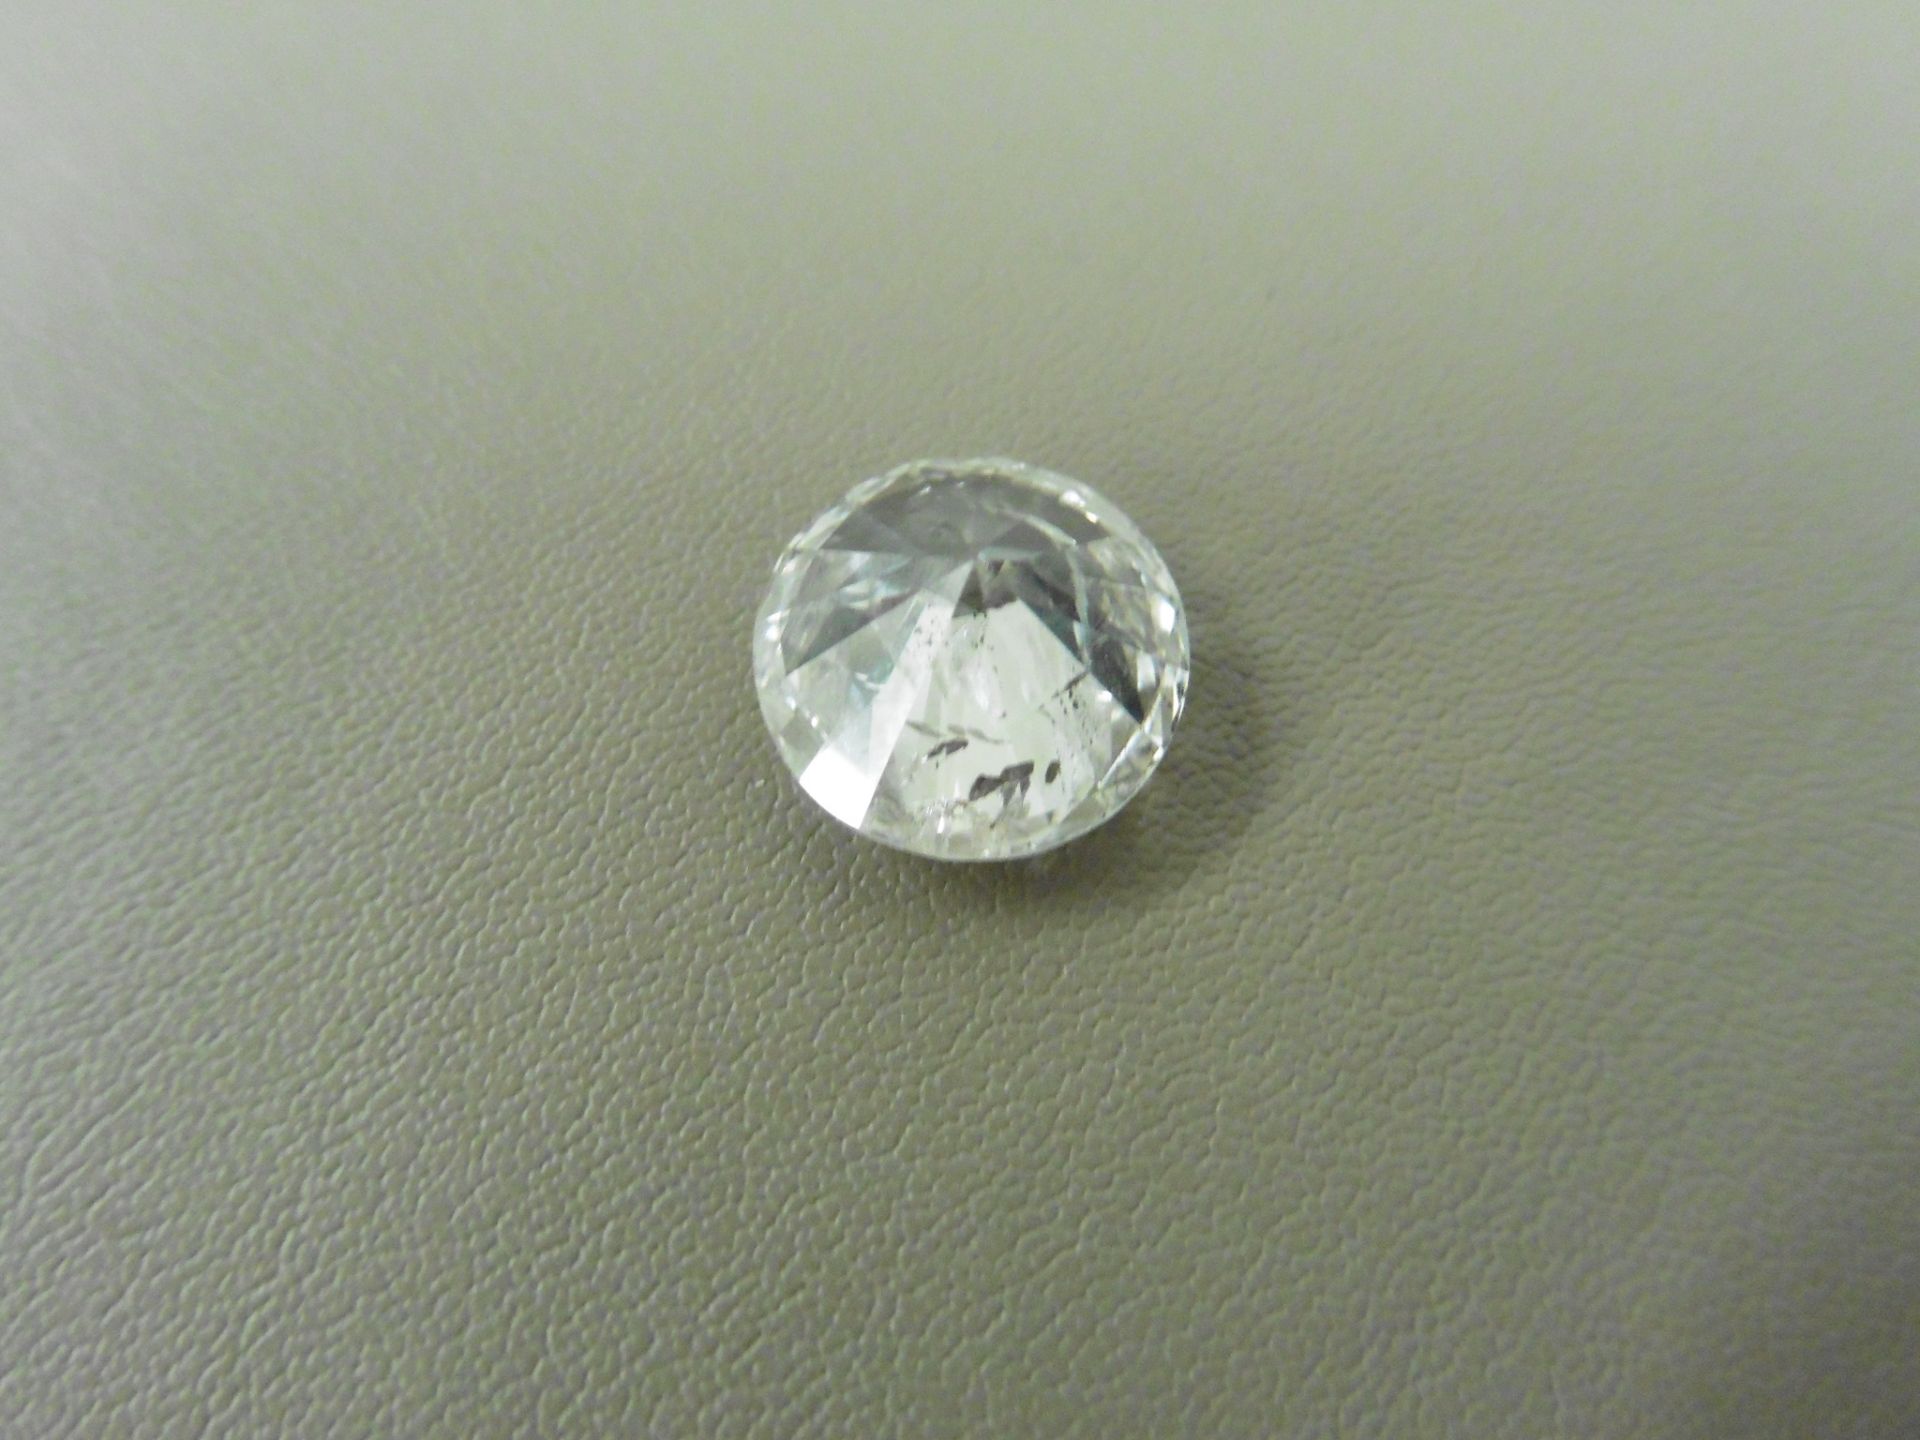 5.04ct natural loose briliant cut diamond. F colour and Il clarity. EGL certification. Valued at £ - Image 3 of 5